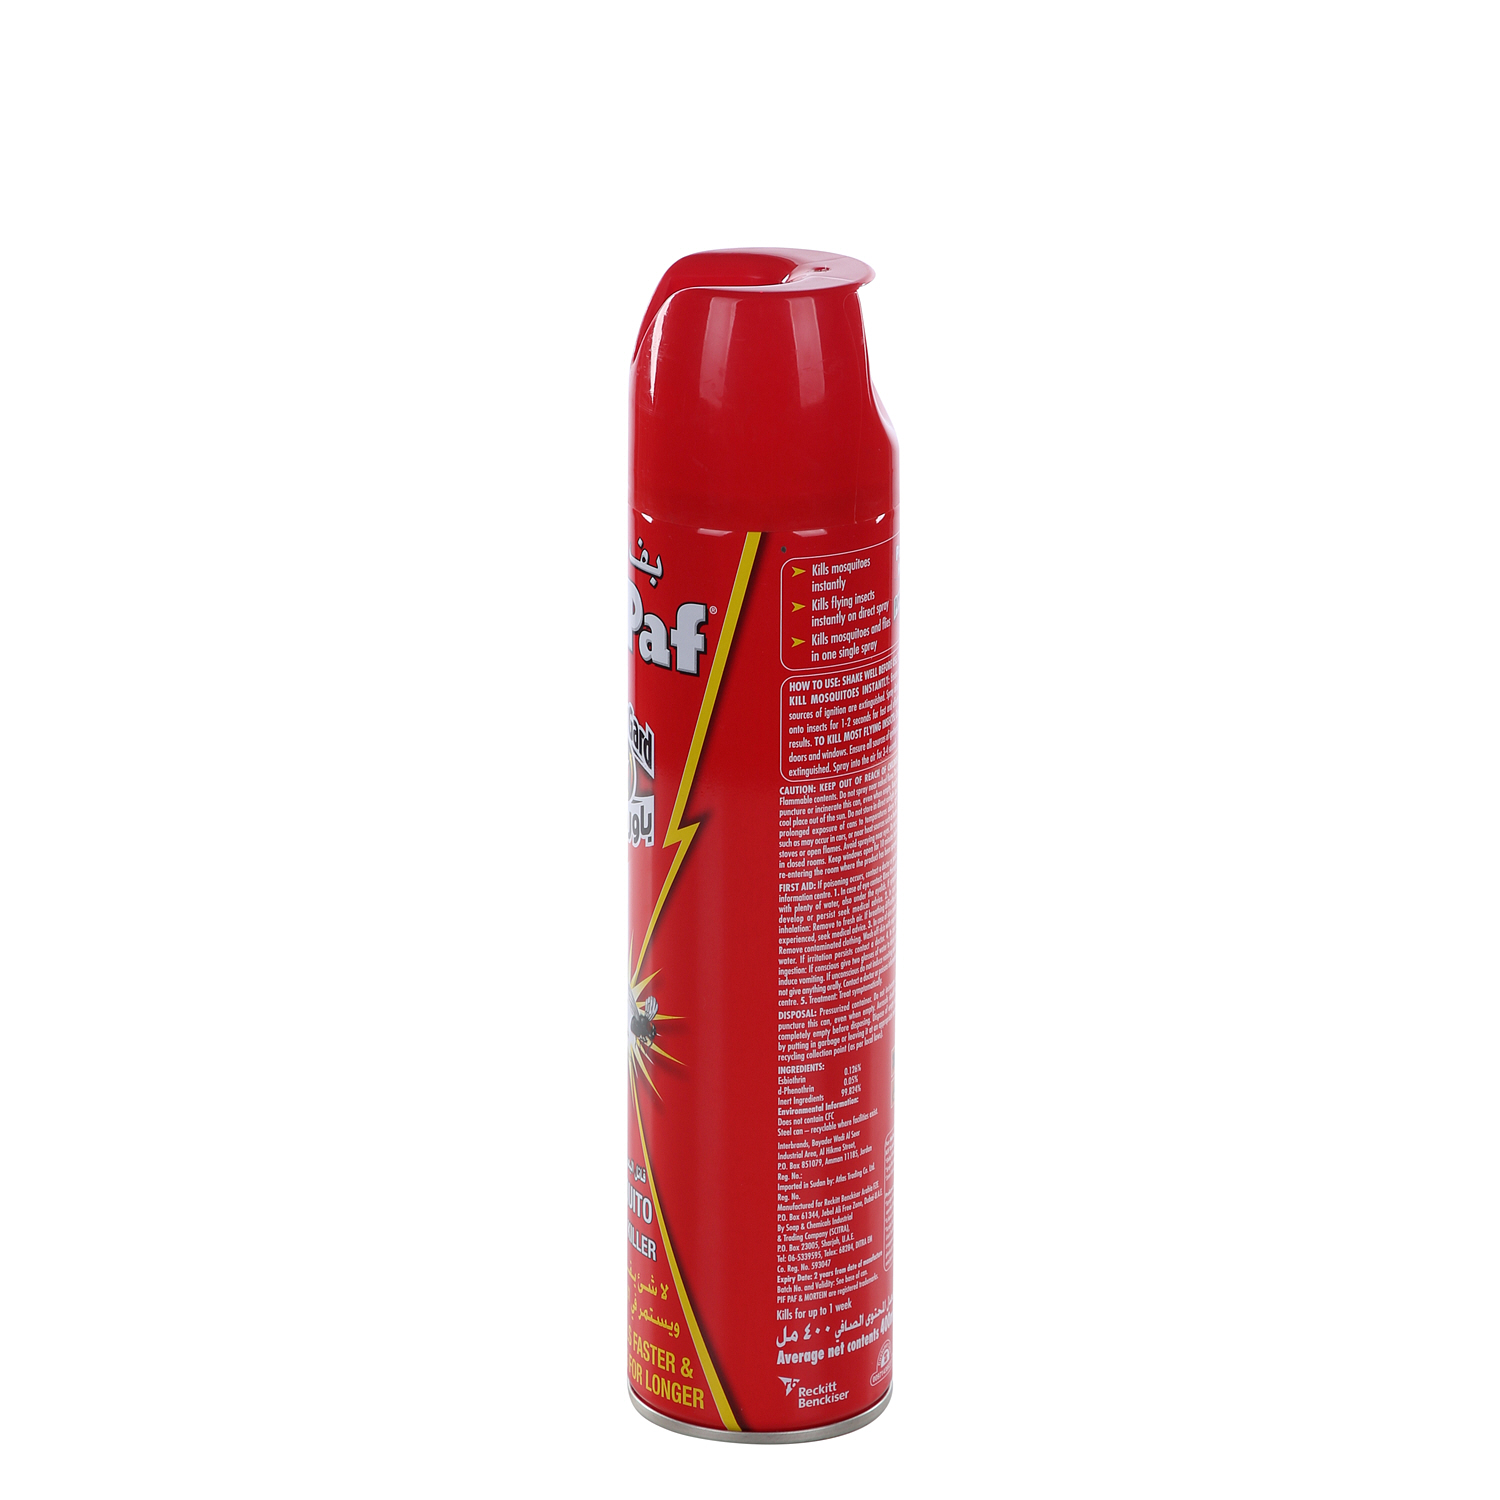 Pif Paf Fly & Mosquito Killer 400 ml